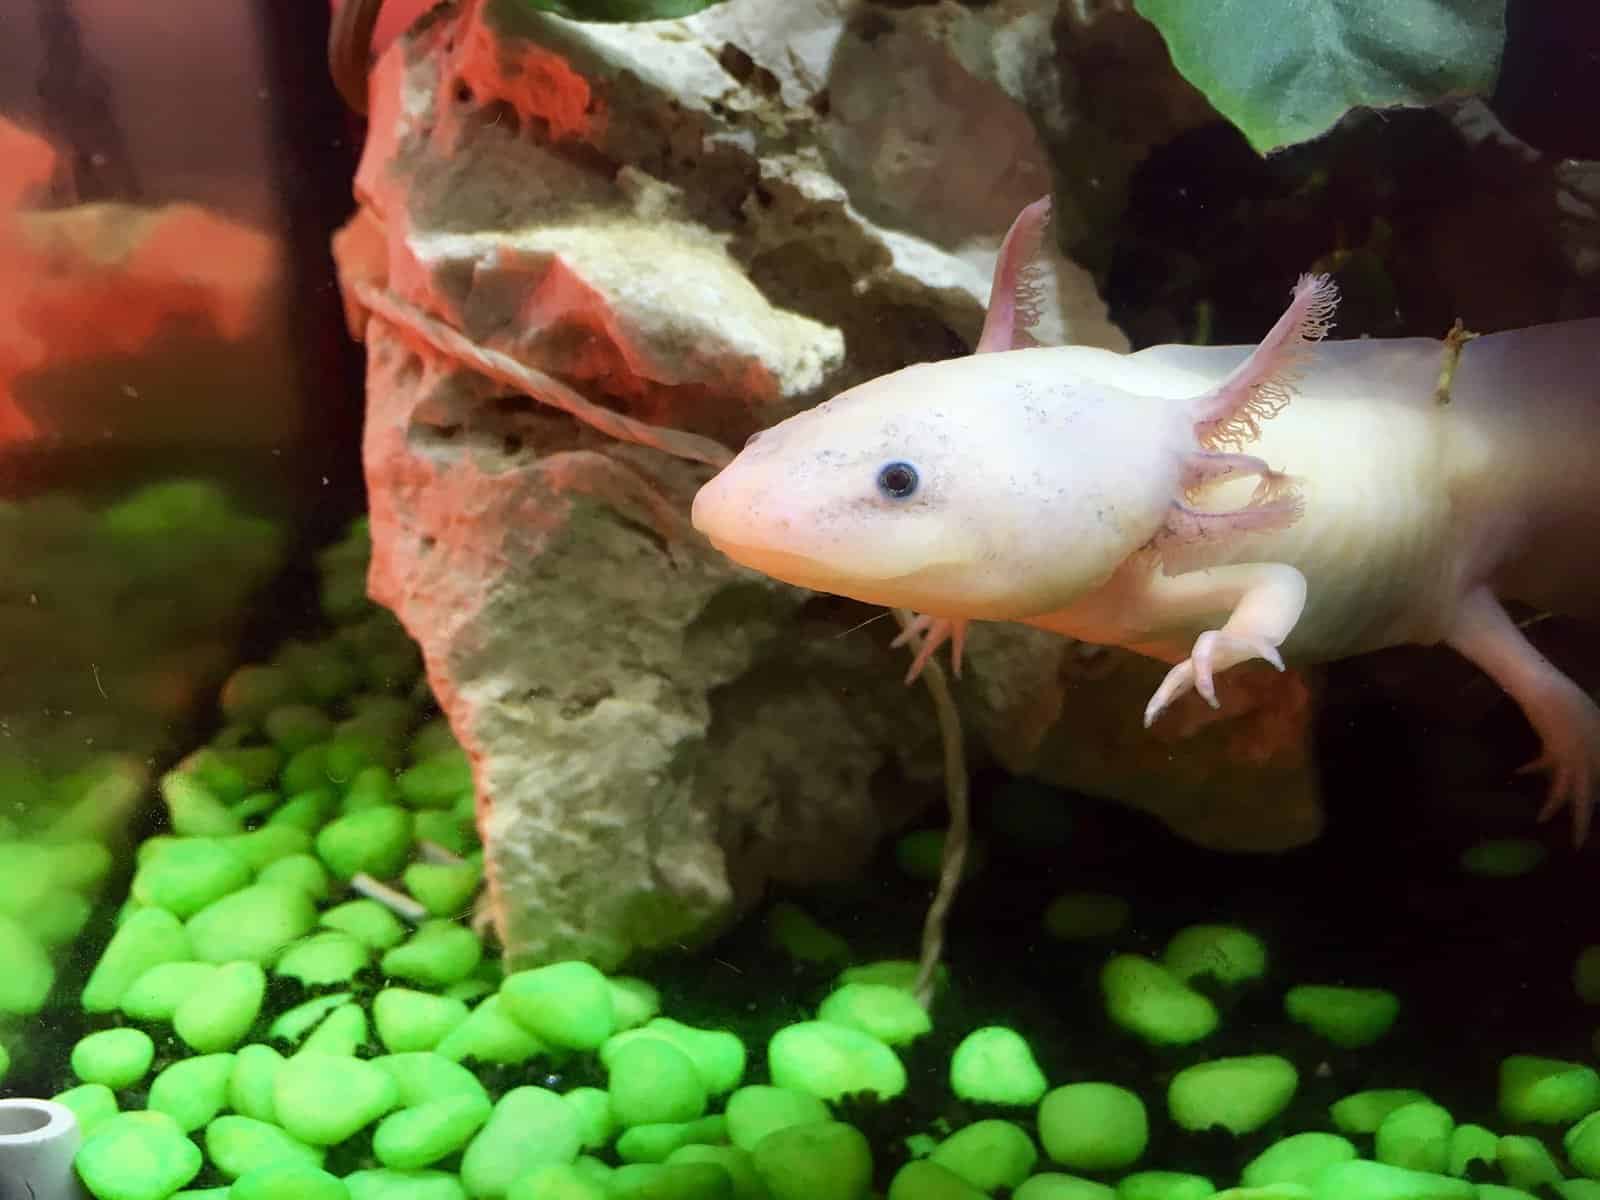 How to Come Up with a Name for Your Axolotl